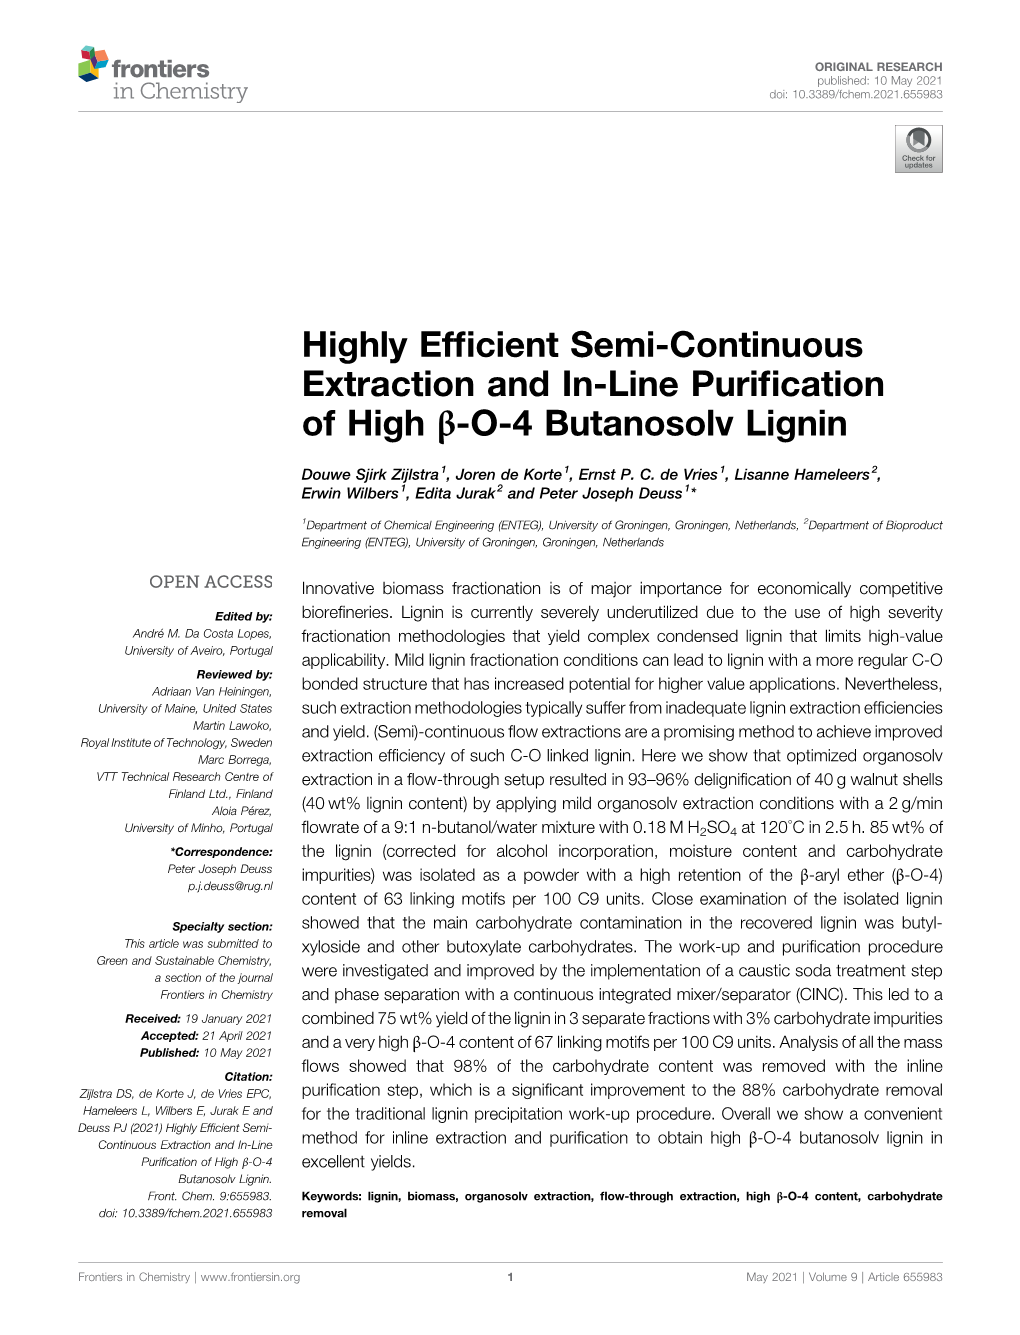 Highly Efficient Semi-Continuous Extraction and In-Line Purification of High Β-O-4 Butanosolv Lignin